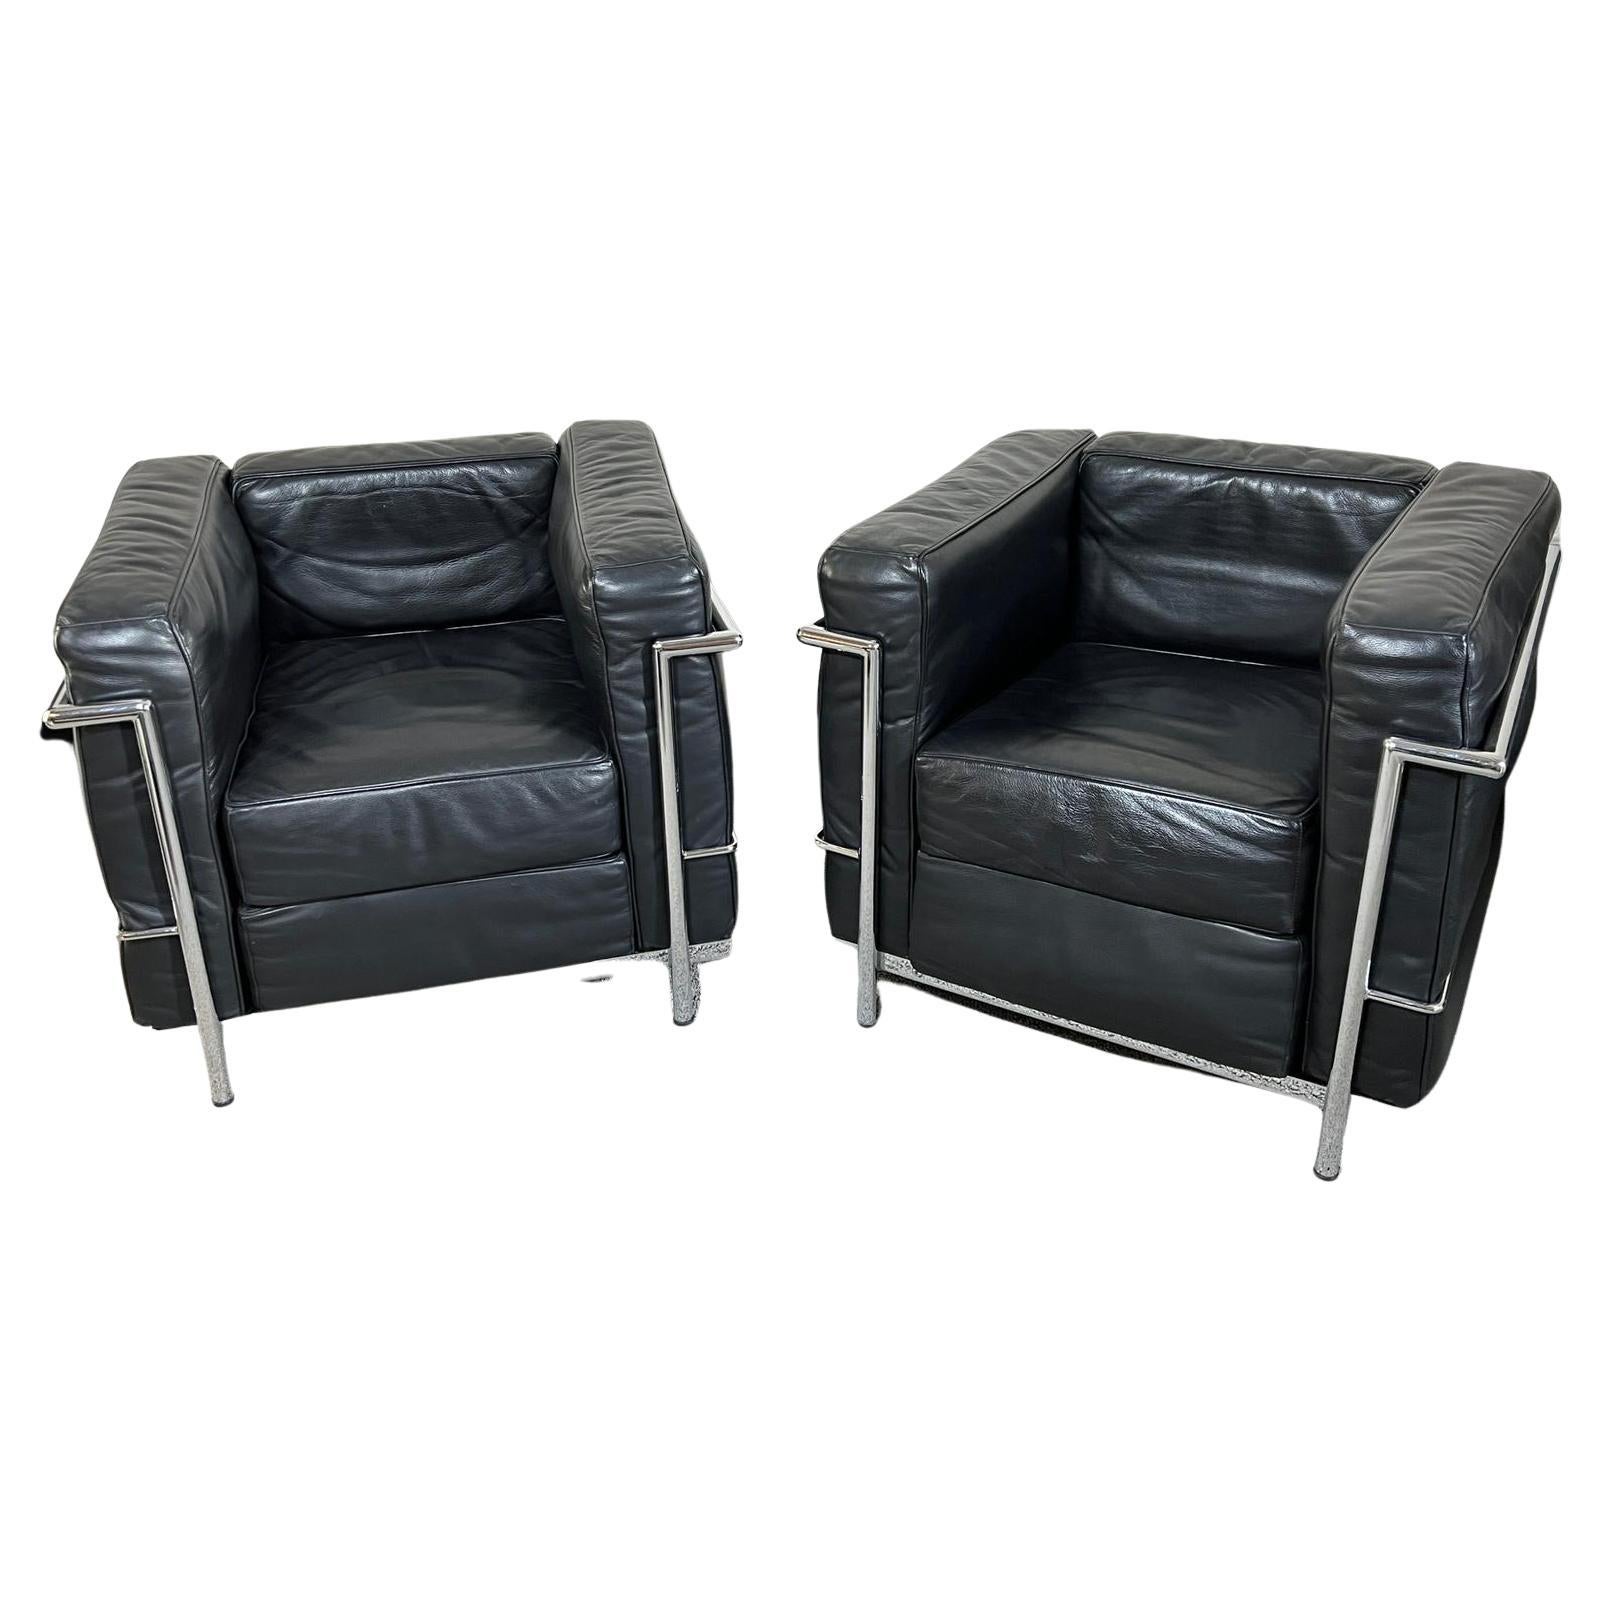 LC2 Club Chairs by Le Corbusier, Jeanneret & Perriand, Soft Black Leather